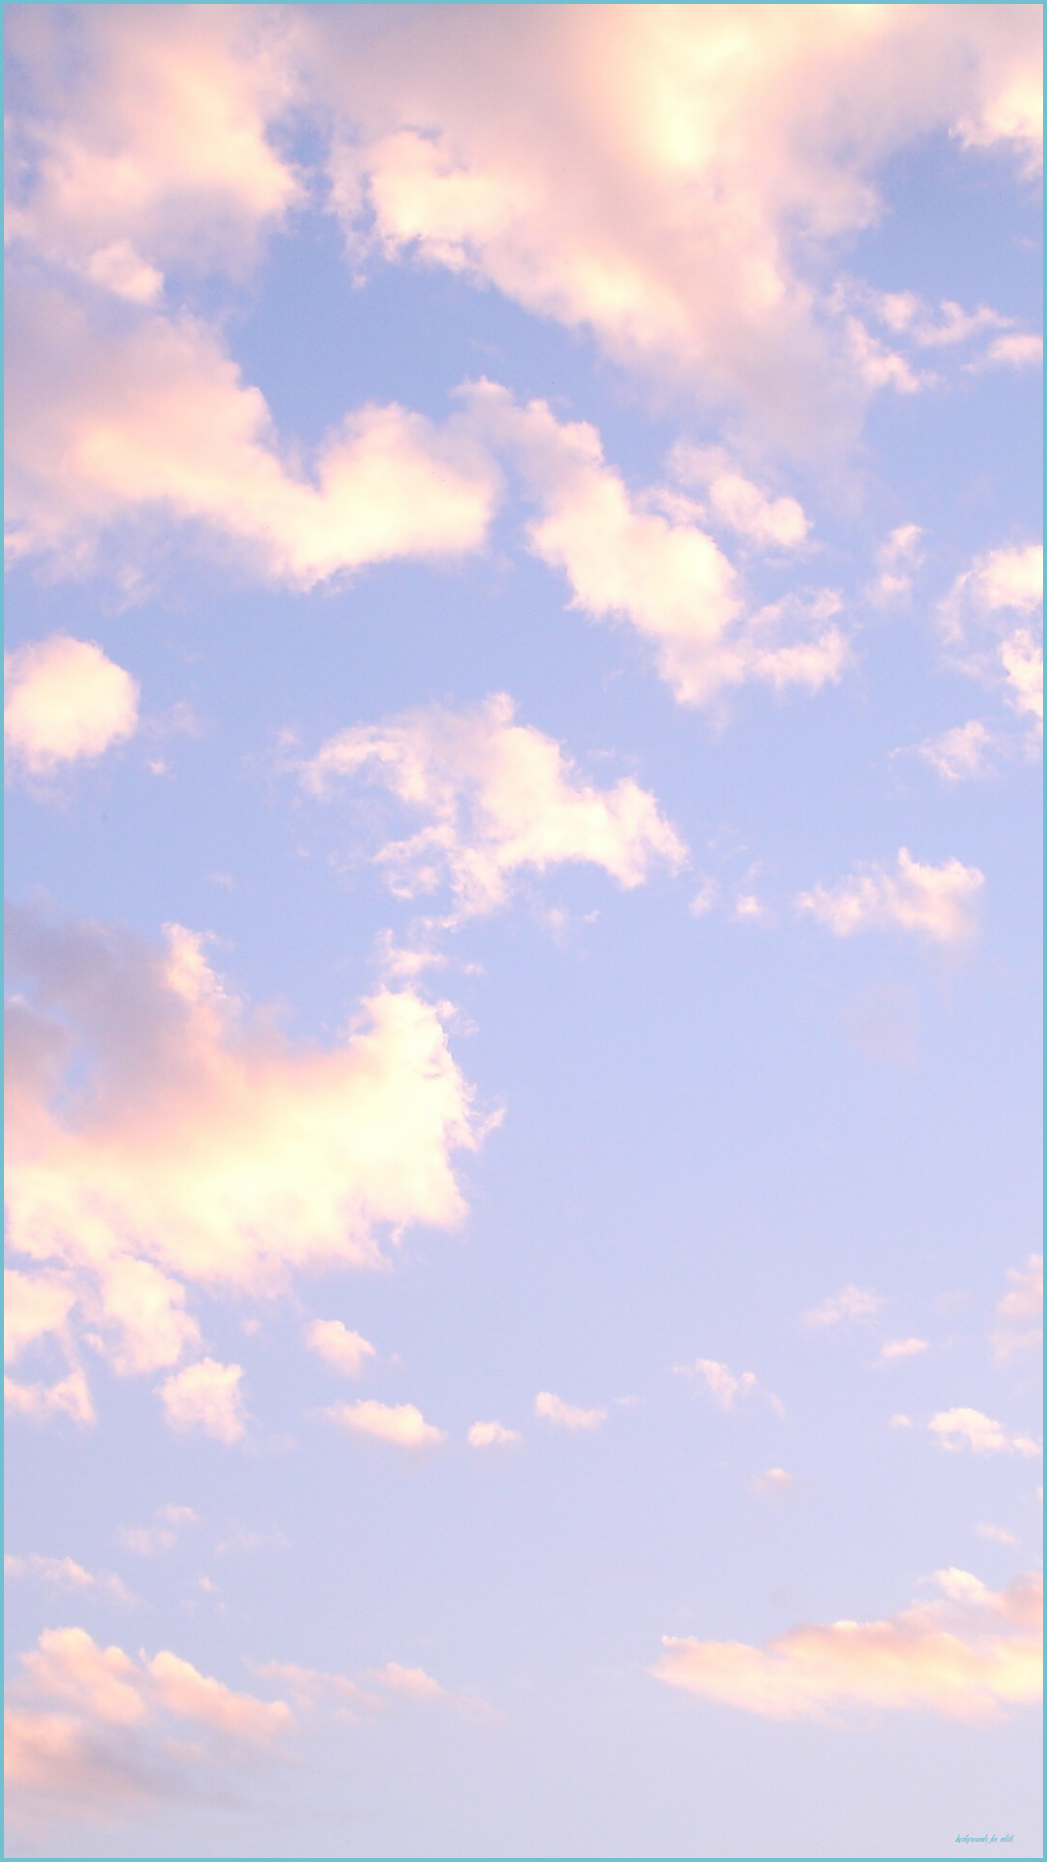 Cloudy Day Dreams Cotton Candy Skies Free Mobile Wallpaper For Edits